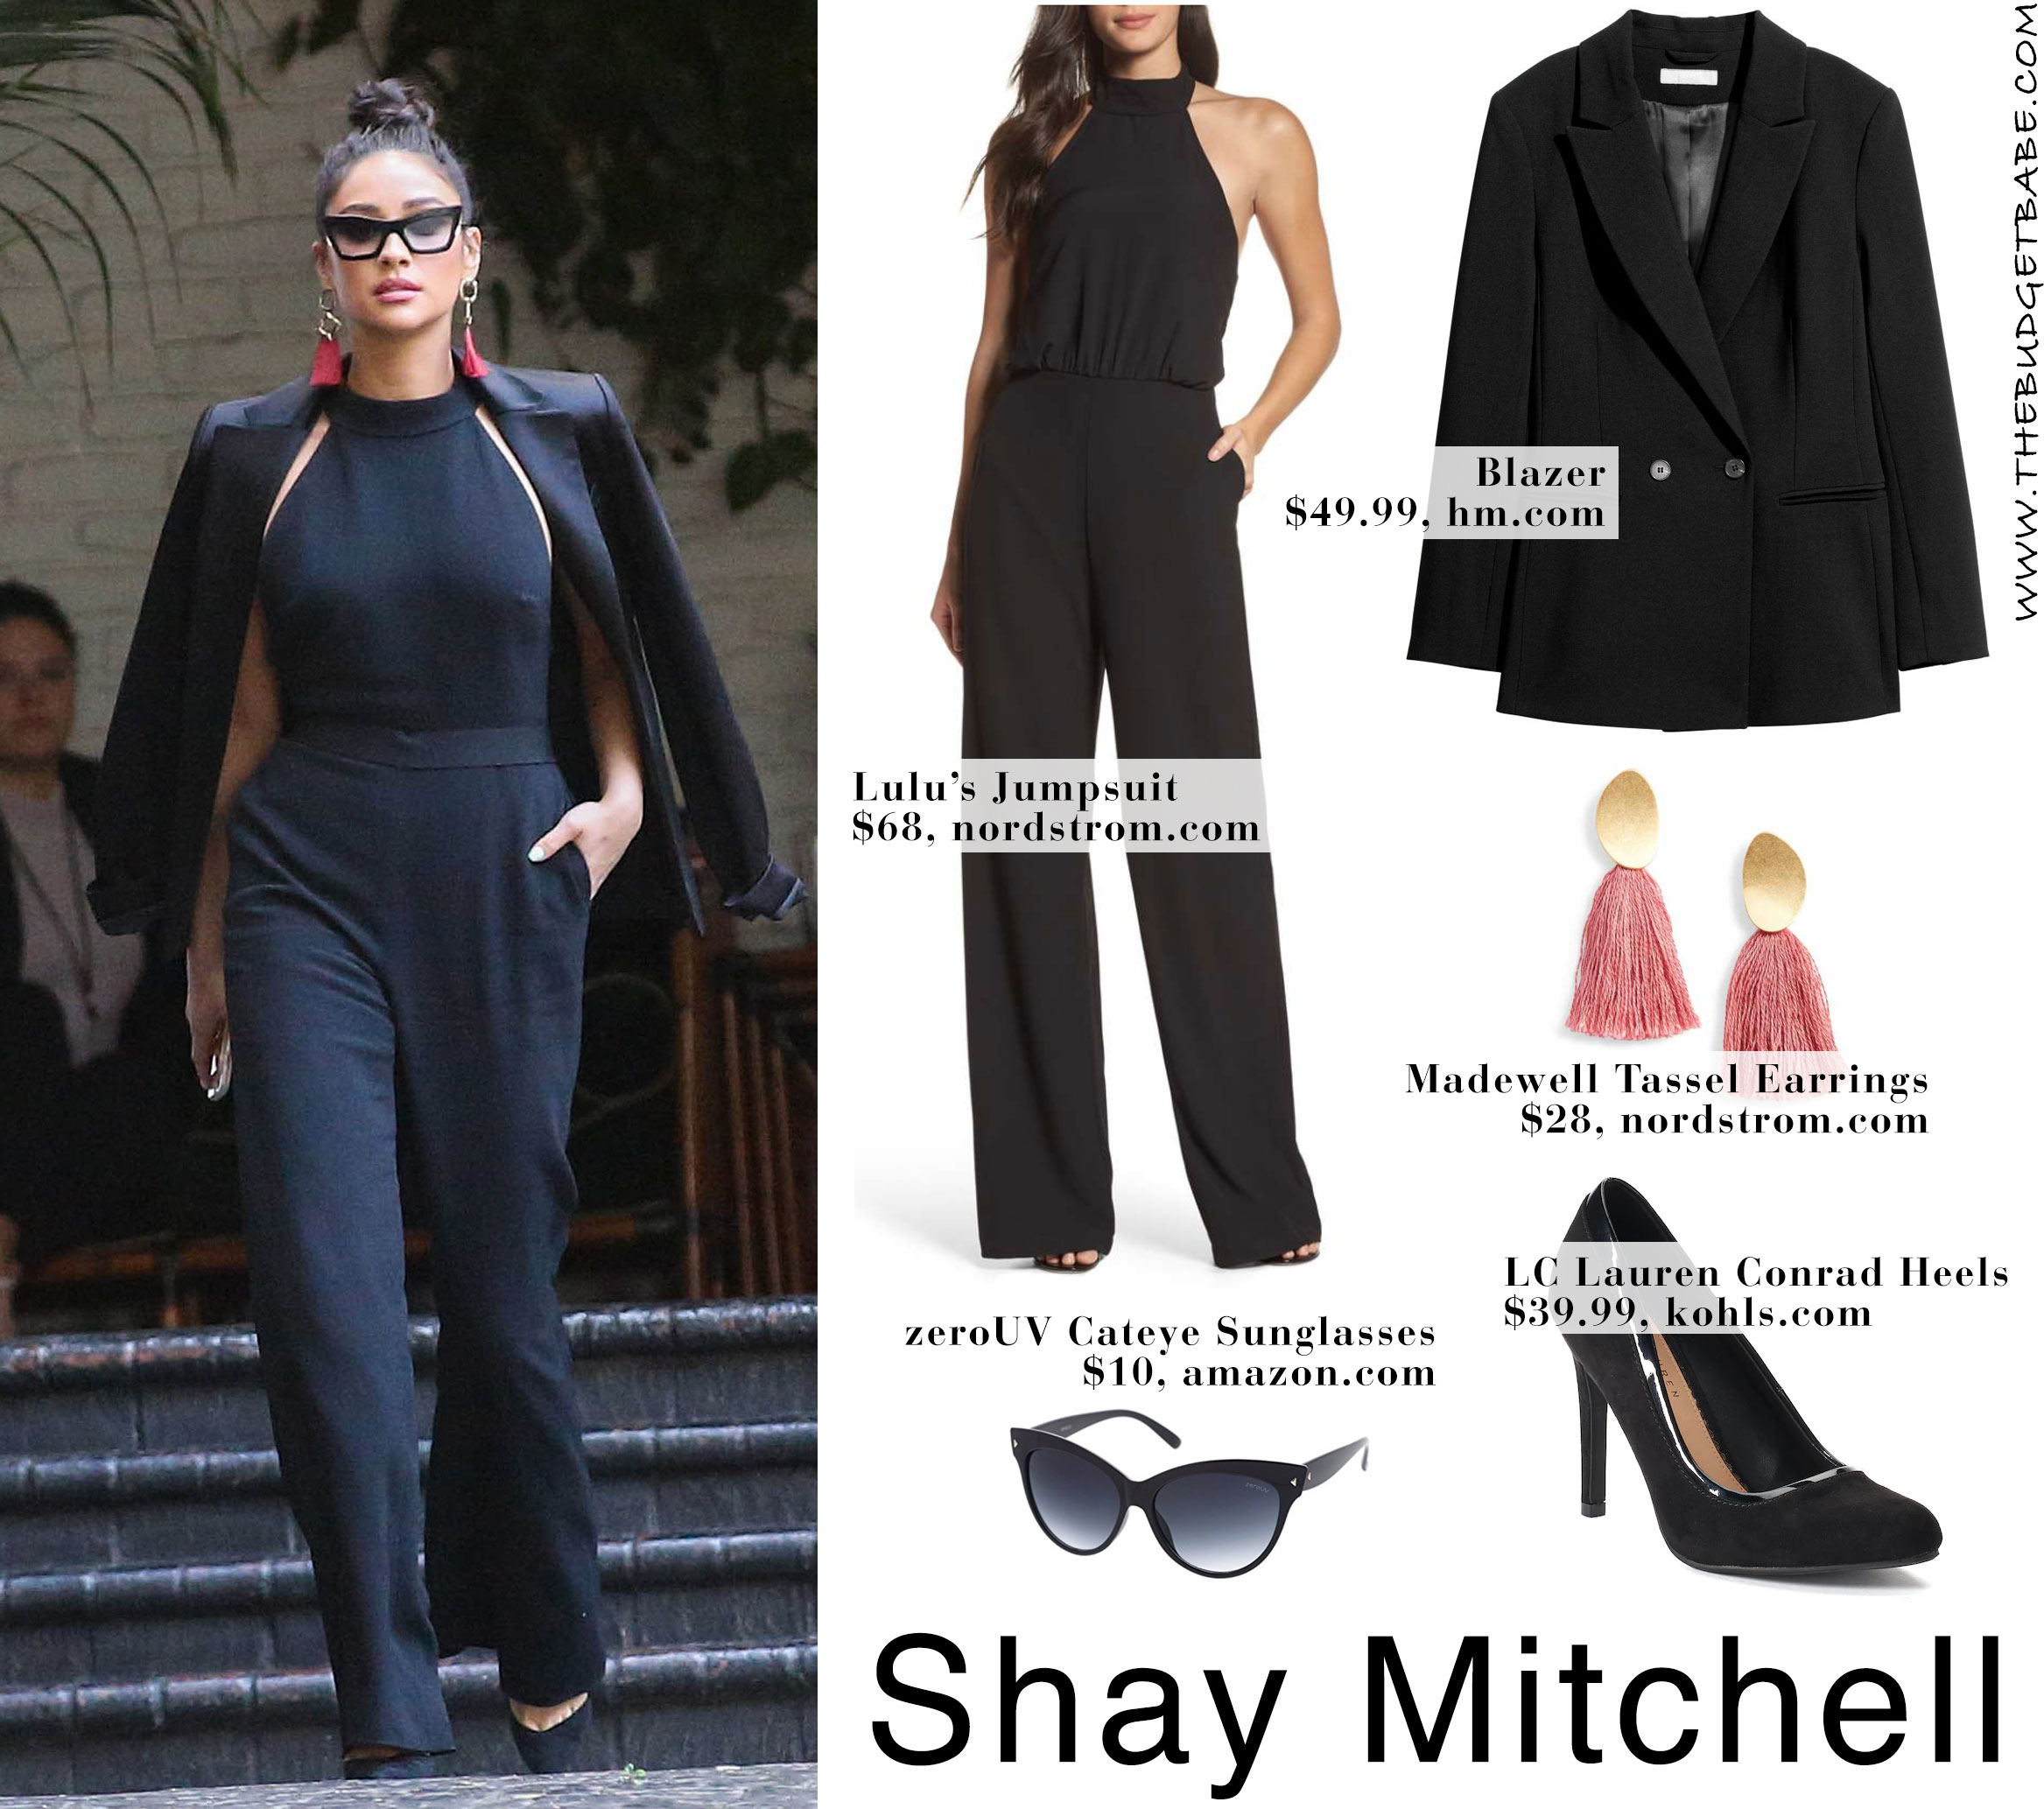 Shay Mitchell looks chic in a black jumpsuit and pink tassel earrings.